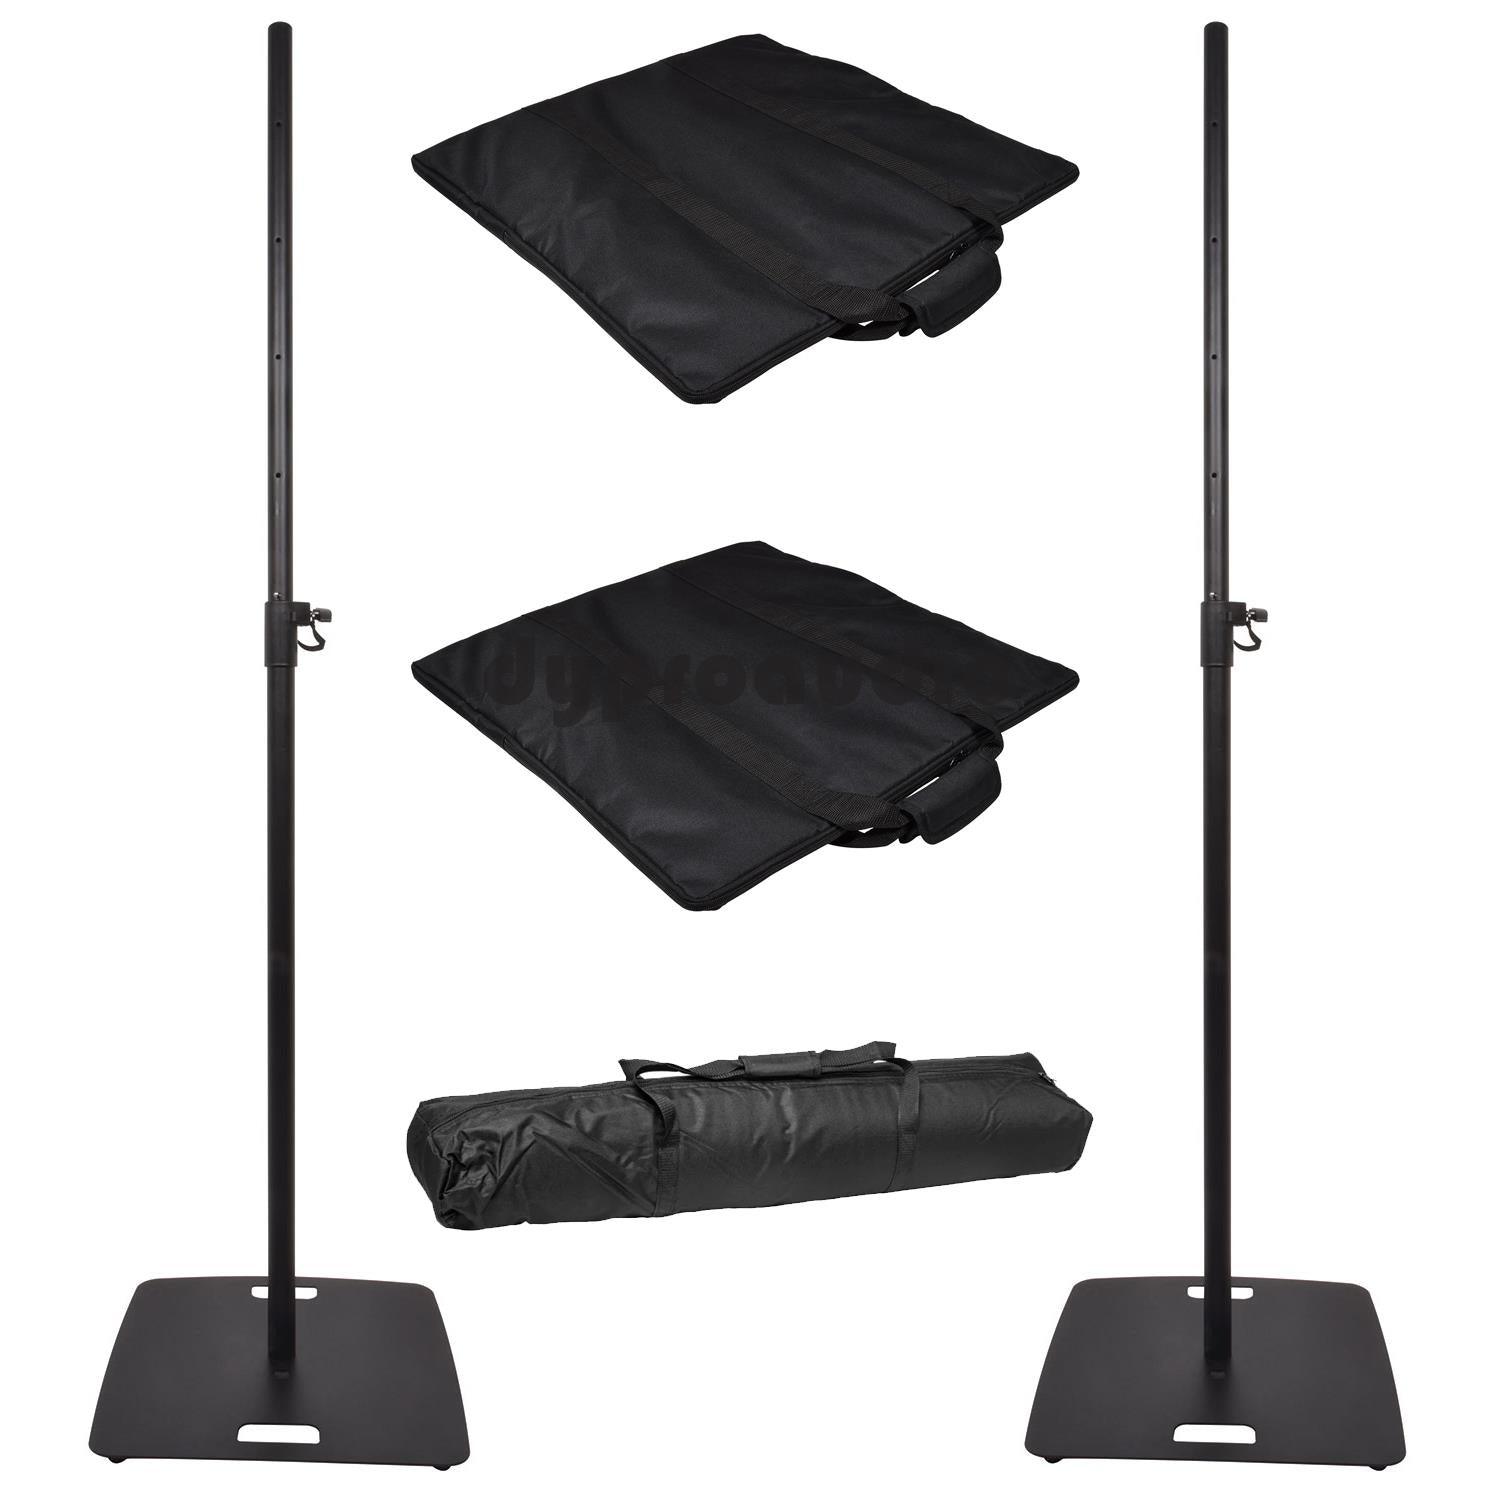 2 x QTX Speaker Stand Black with Square Base with Carry Bags - DY Pro Audio